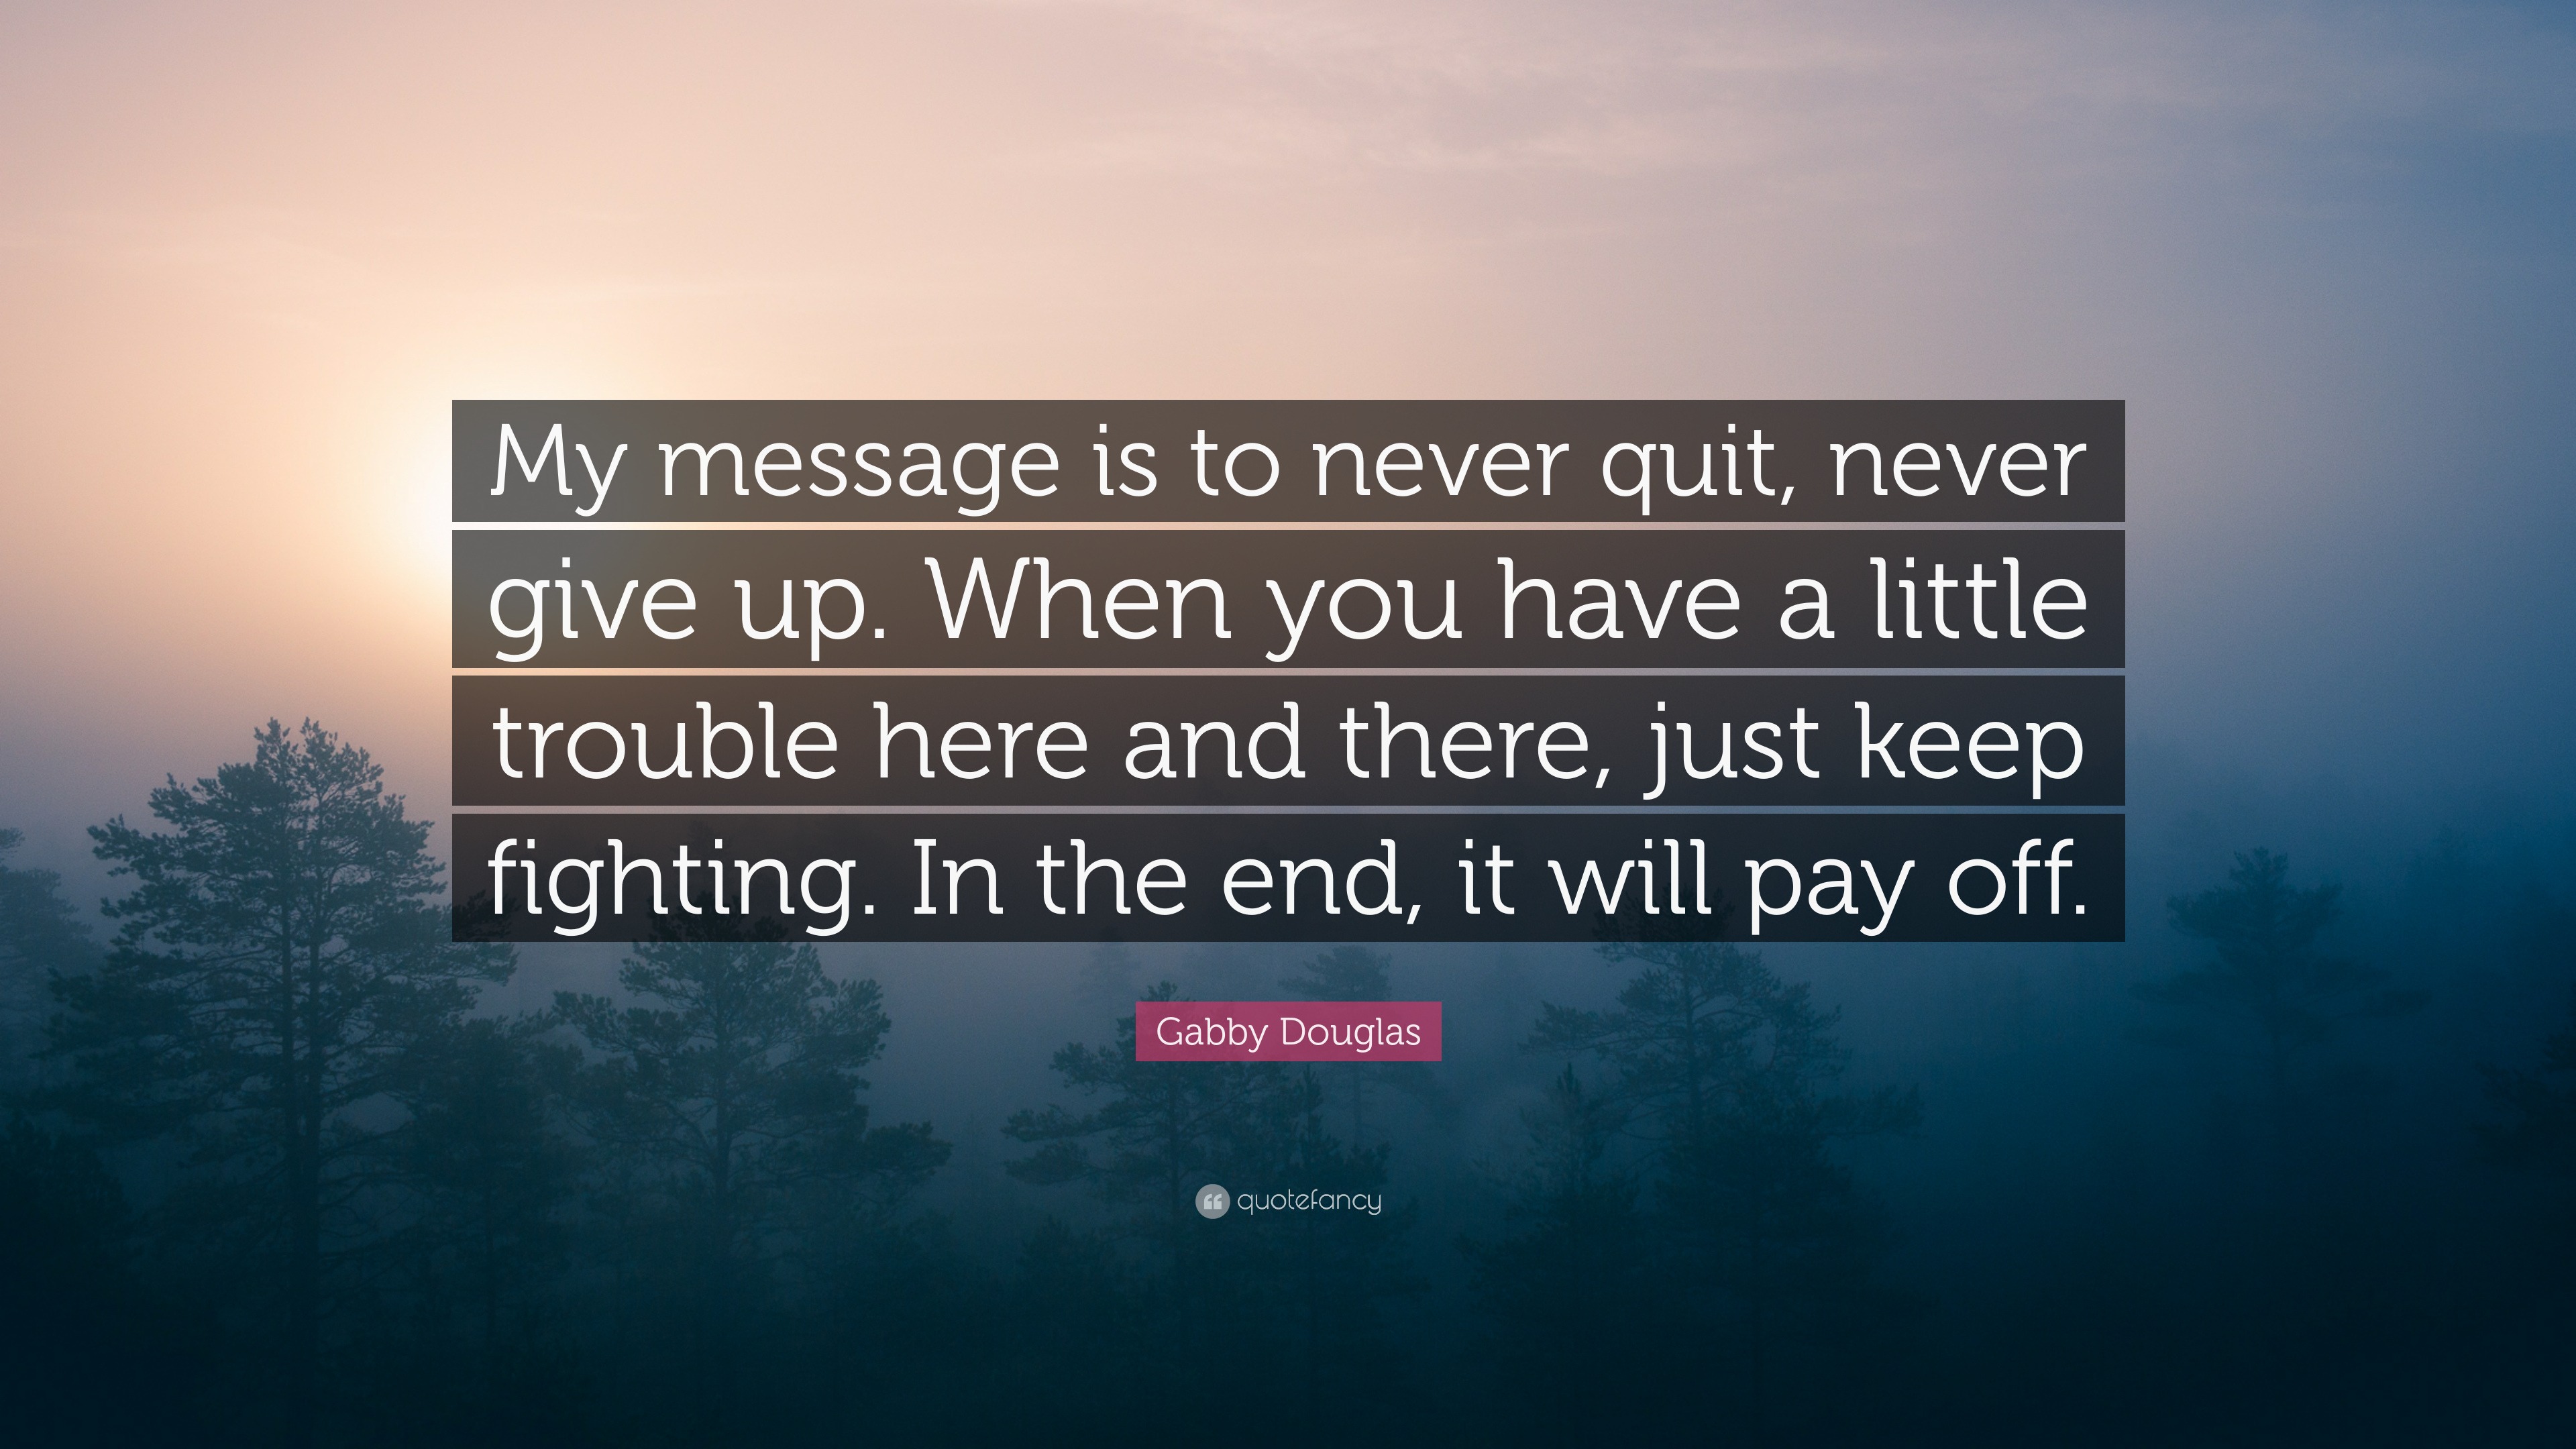 Gabby Douglas Quote: “My message is to never quit, never give up. When ...